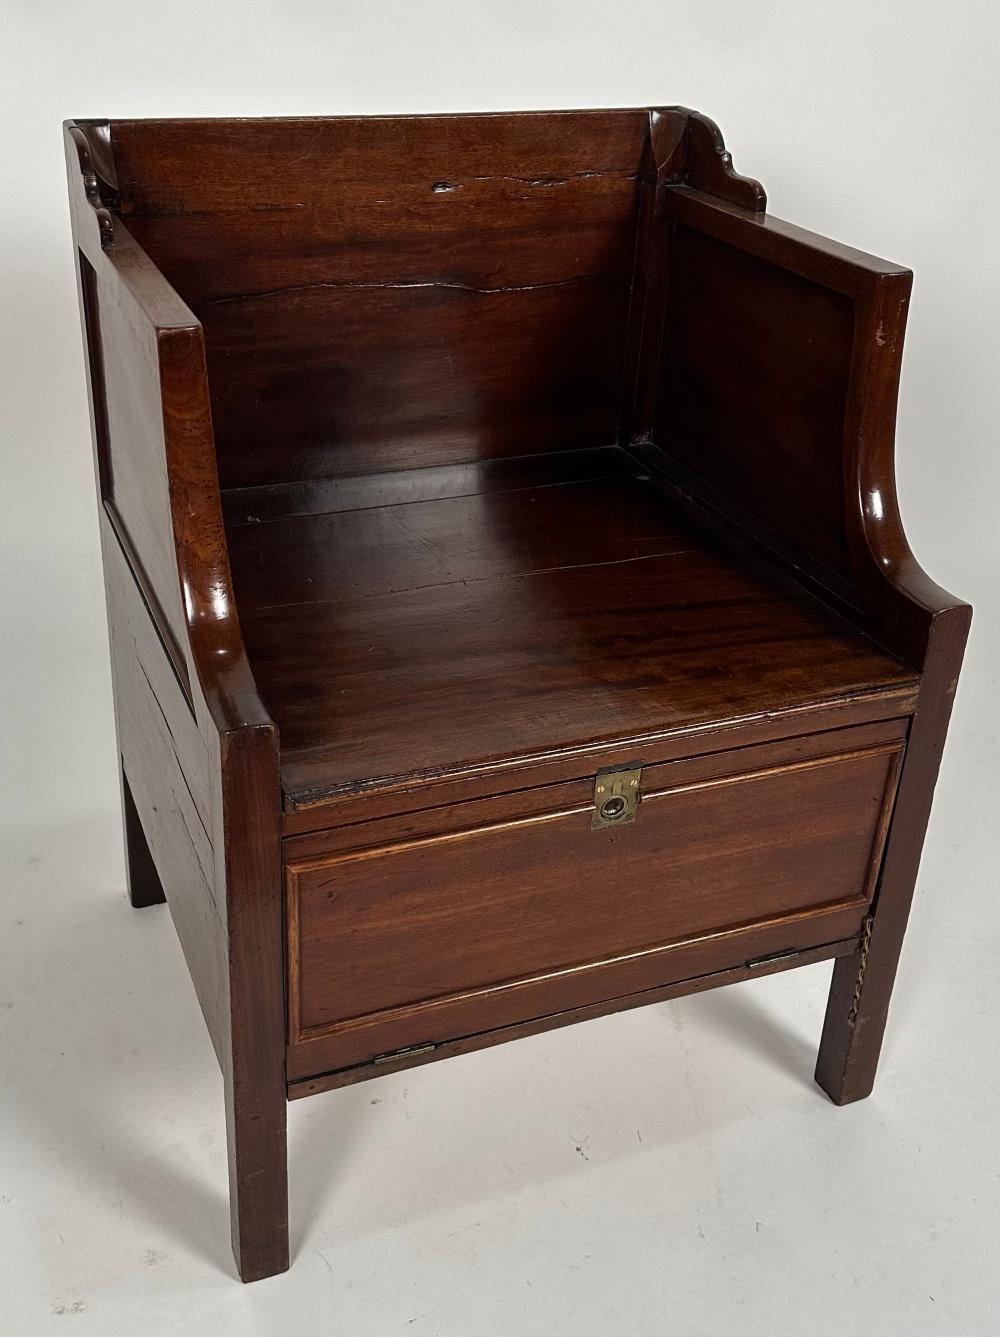 COMMODE CHAIR 19TH CENTURY BACK 3528c3